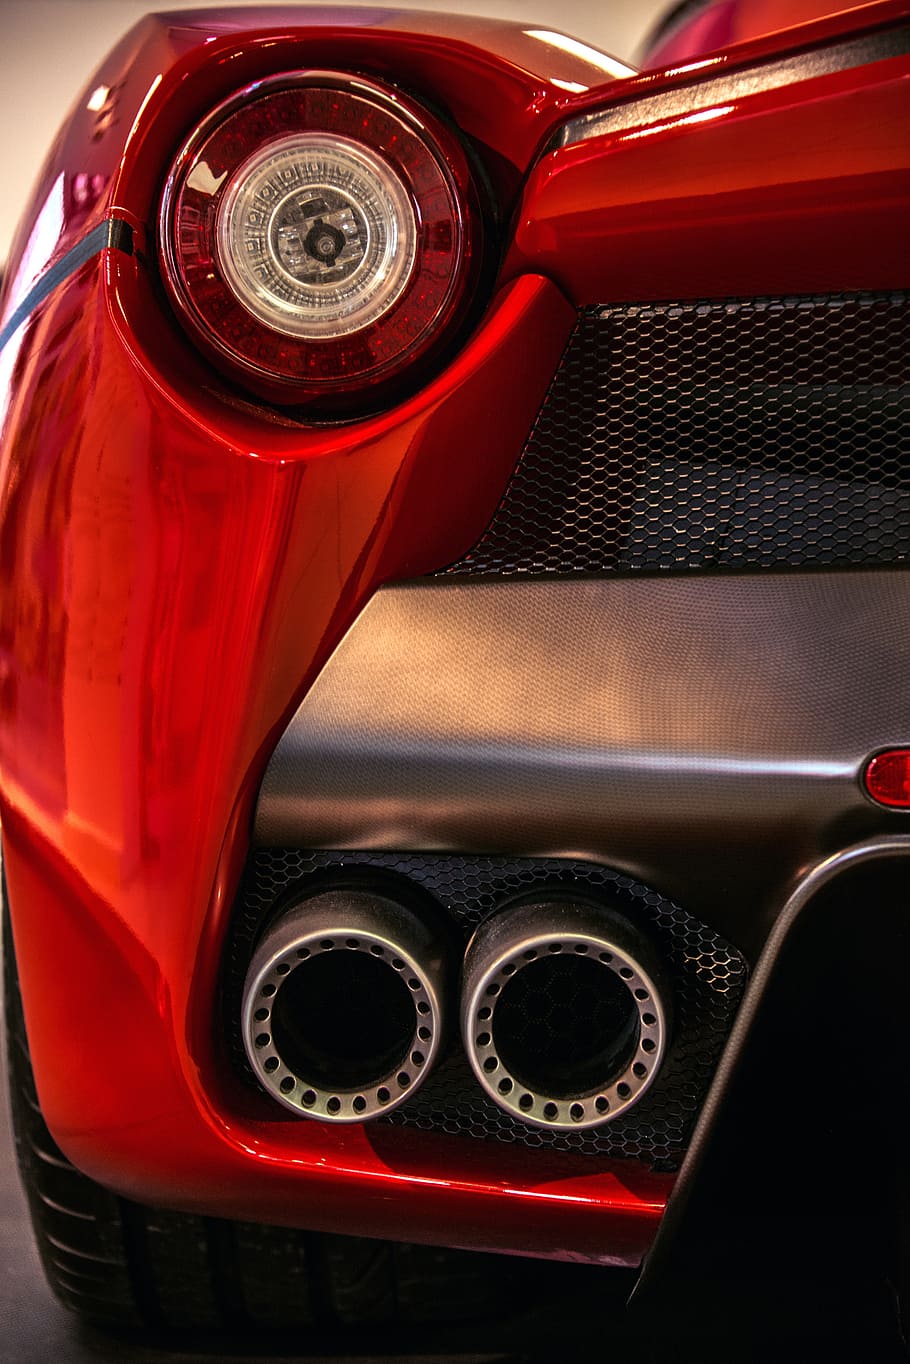 Hd Wallpaper Close Up Photo Of Red Sports Coupe Taillight Auto Ferrari Tail Lights Wallpaper Flare